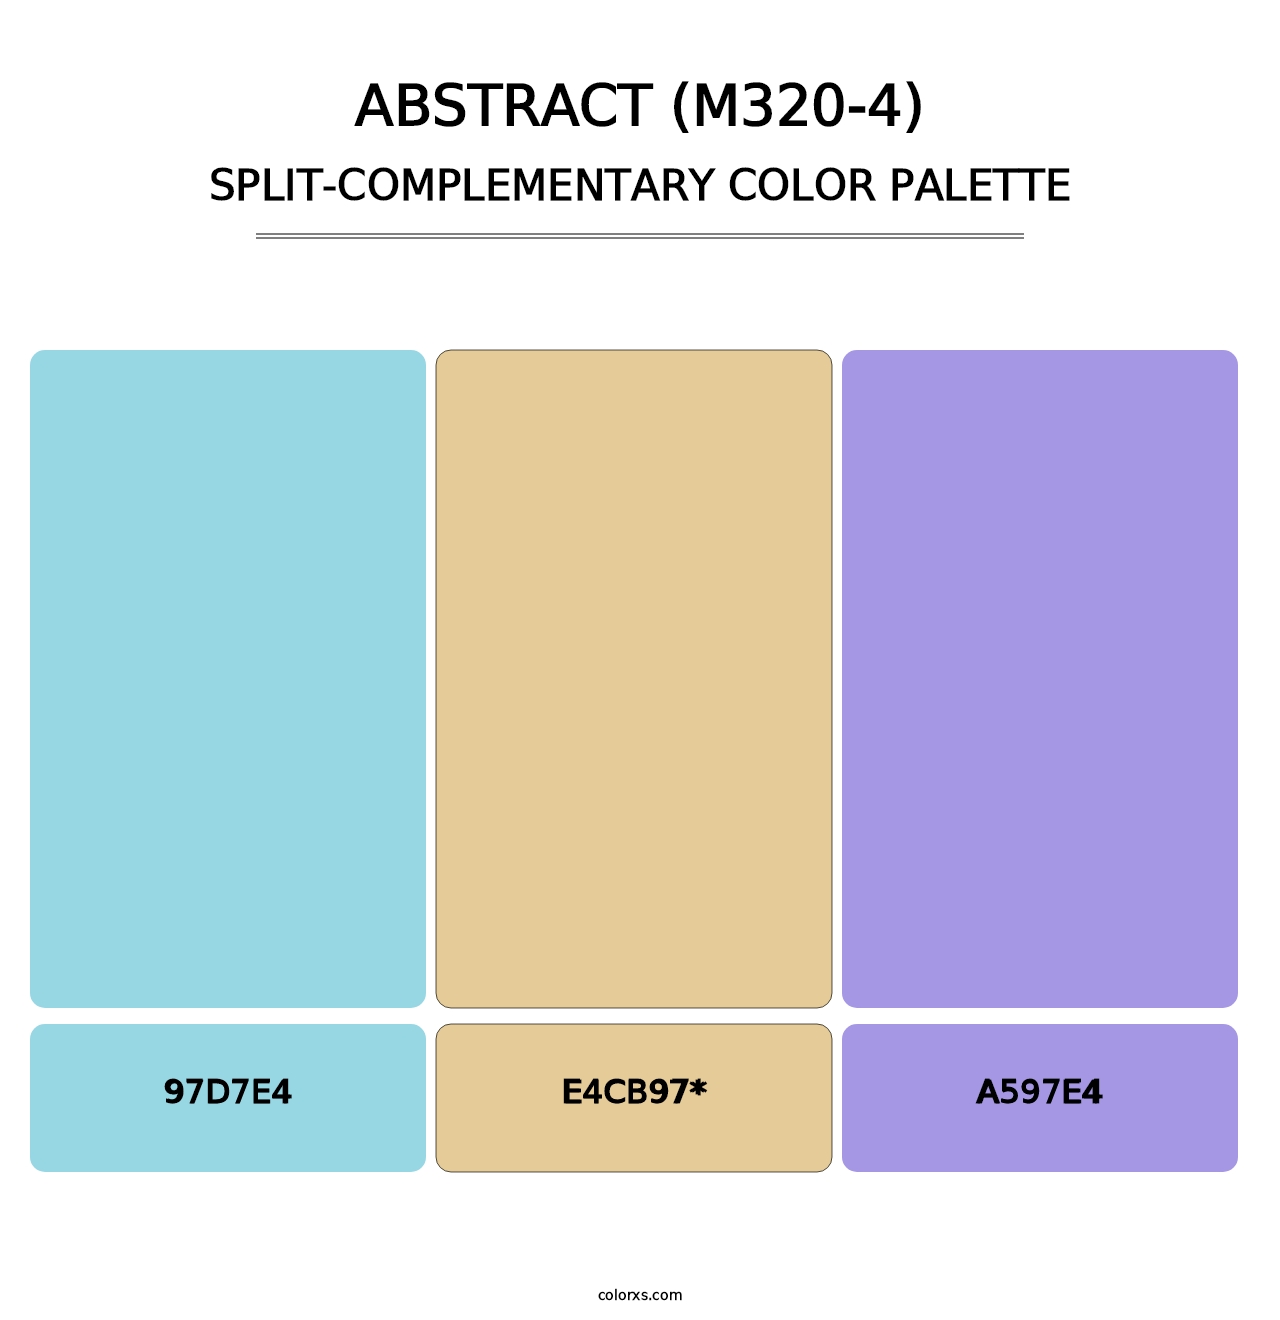 Abstract (M320-4) - Split-Complementary Color Palette